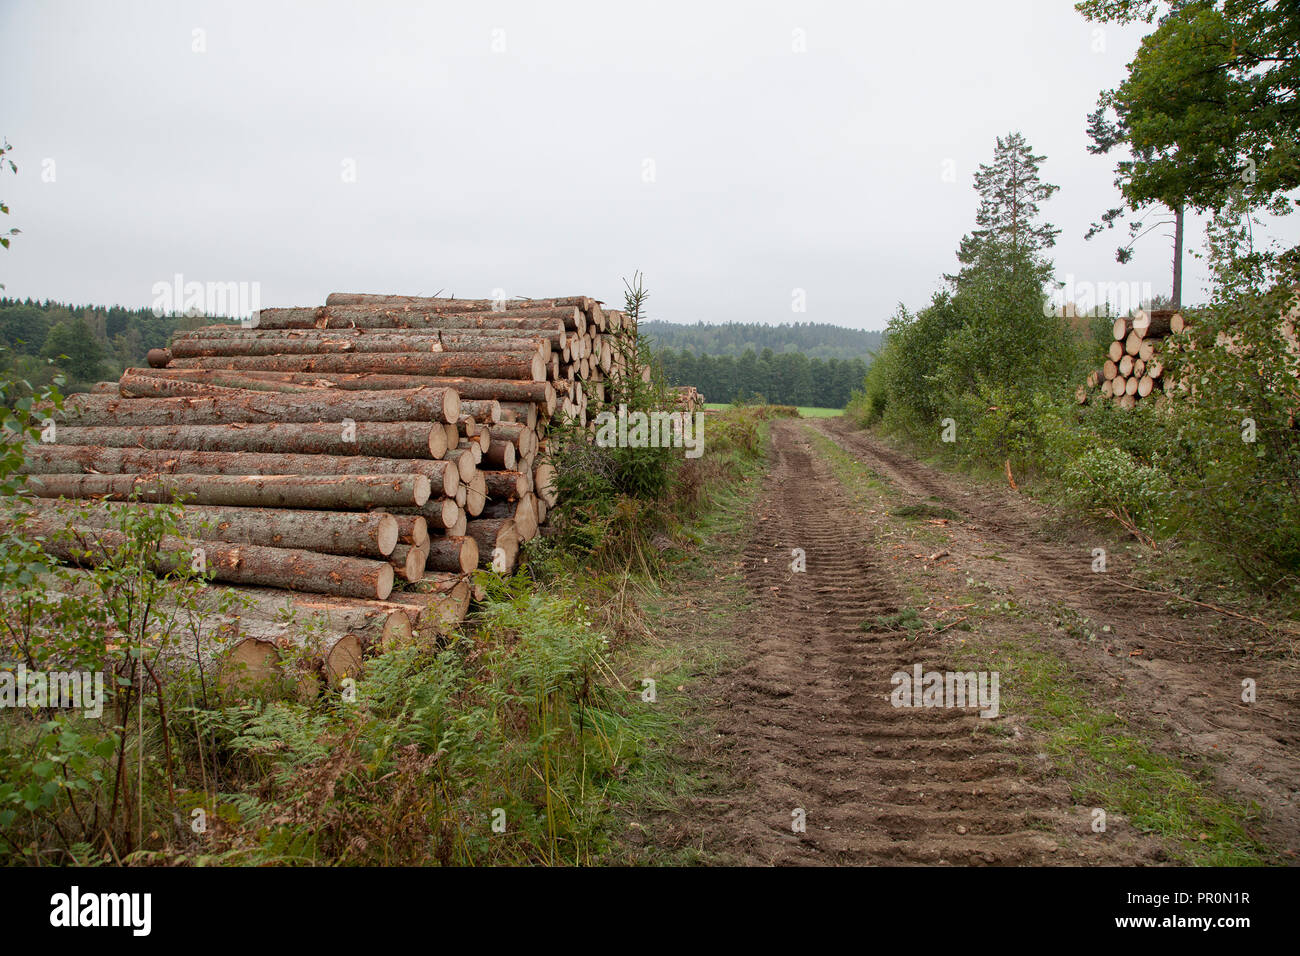 TIMBER STACK Stock Photo